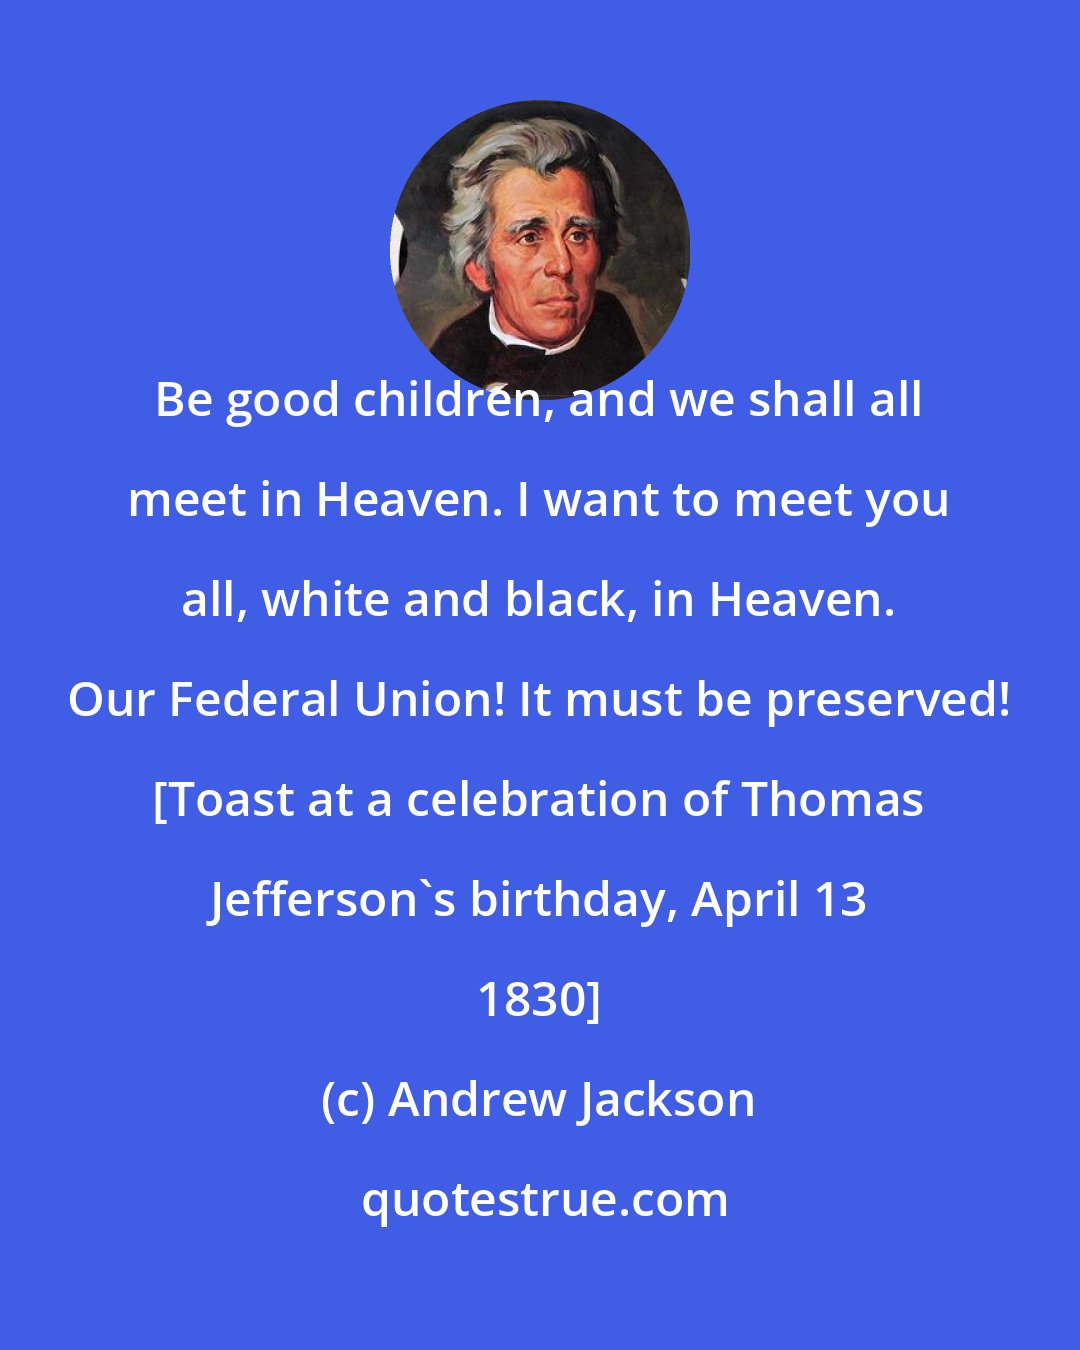 Andrew Jackson: Be good children, and we shall all meet in Heaven. I want to meet you all, white and black, in Heaven. Our Federal Union! It must be preserved! [Toast at a celebration of Thomas Jefferson's birthday, April 13 1830]